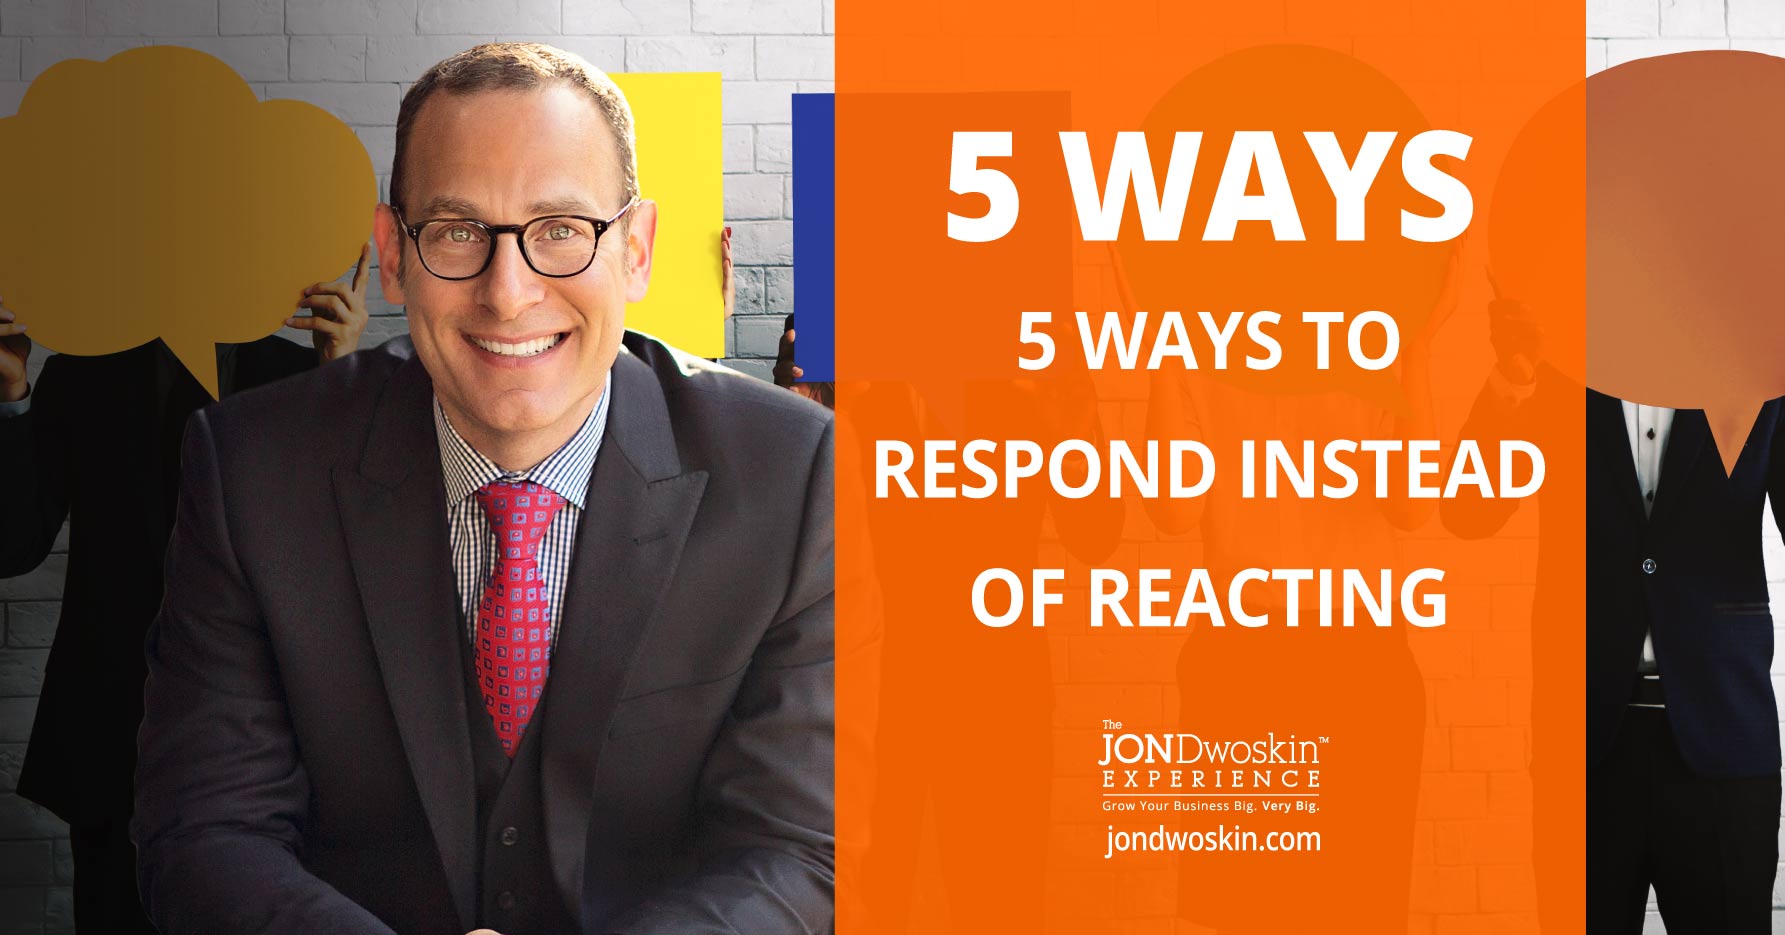 5 Ways to Respond Instead of Reacting